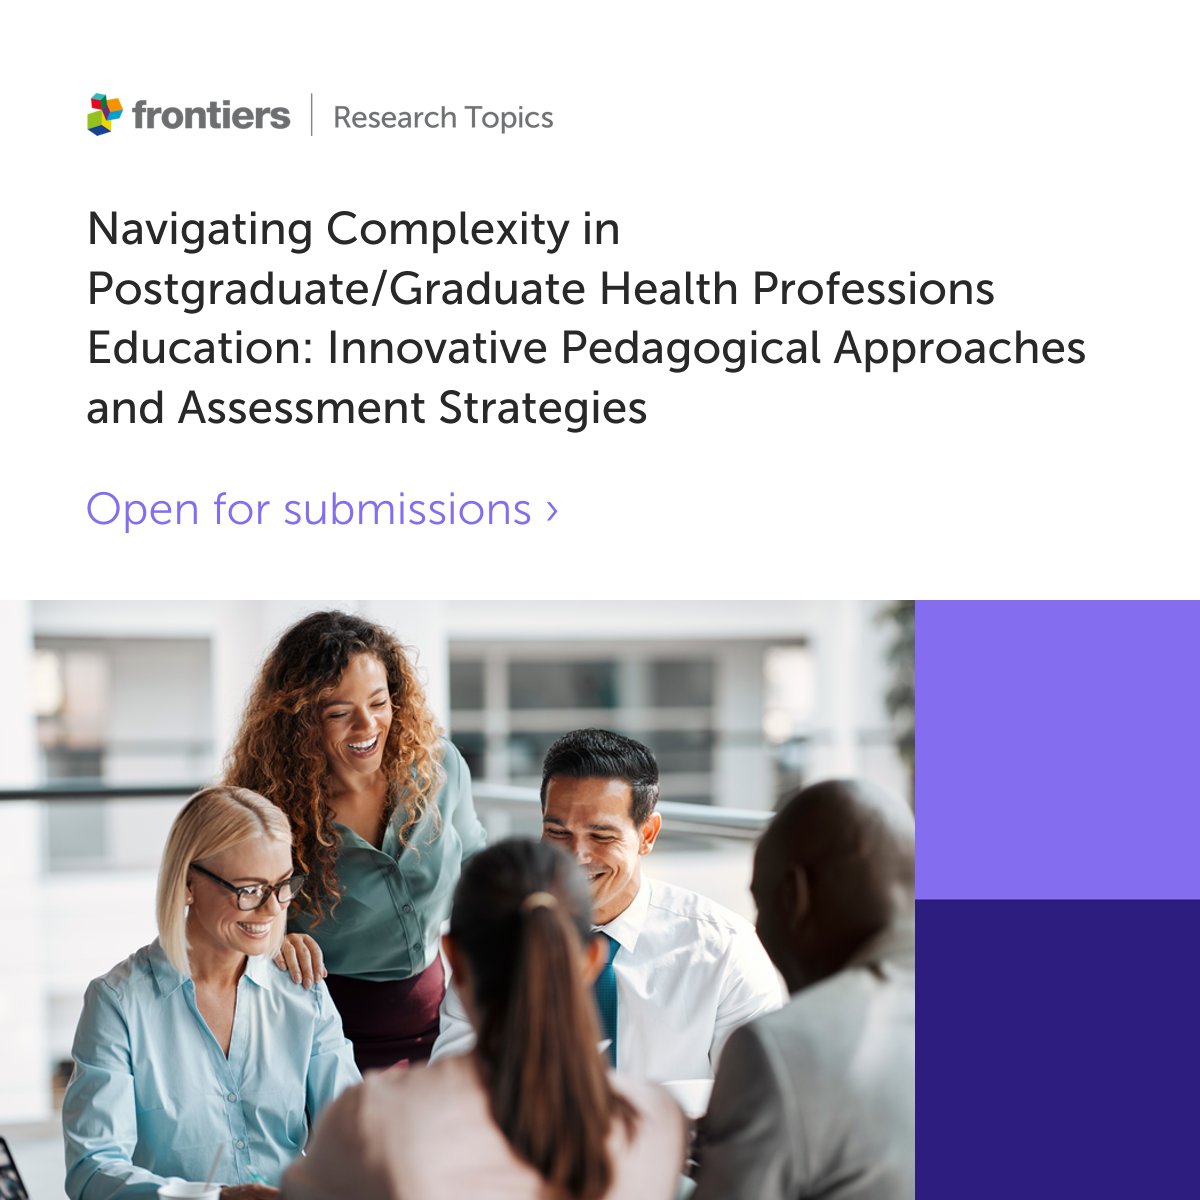 📢 Call for papers! 'Navigating Complexity in Postgraduate/Graduate Health Professions Education: Innovative Pedagogical Approaches and Assessment Strategies' Edited by Shaista Guraya, Nabil Zary, and Preman Rajalingam Contribute or find out more ➡️ fro.ntiers.in/63396